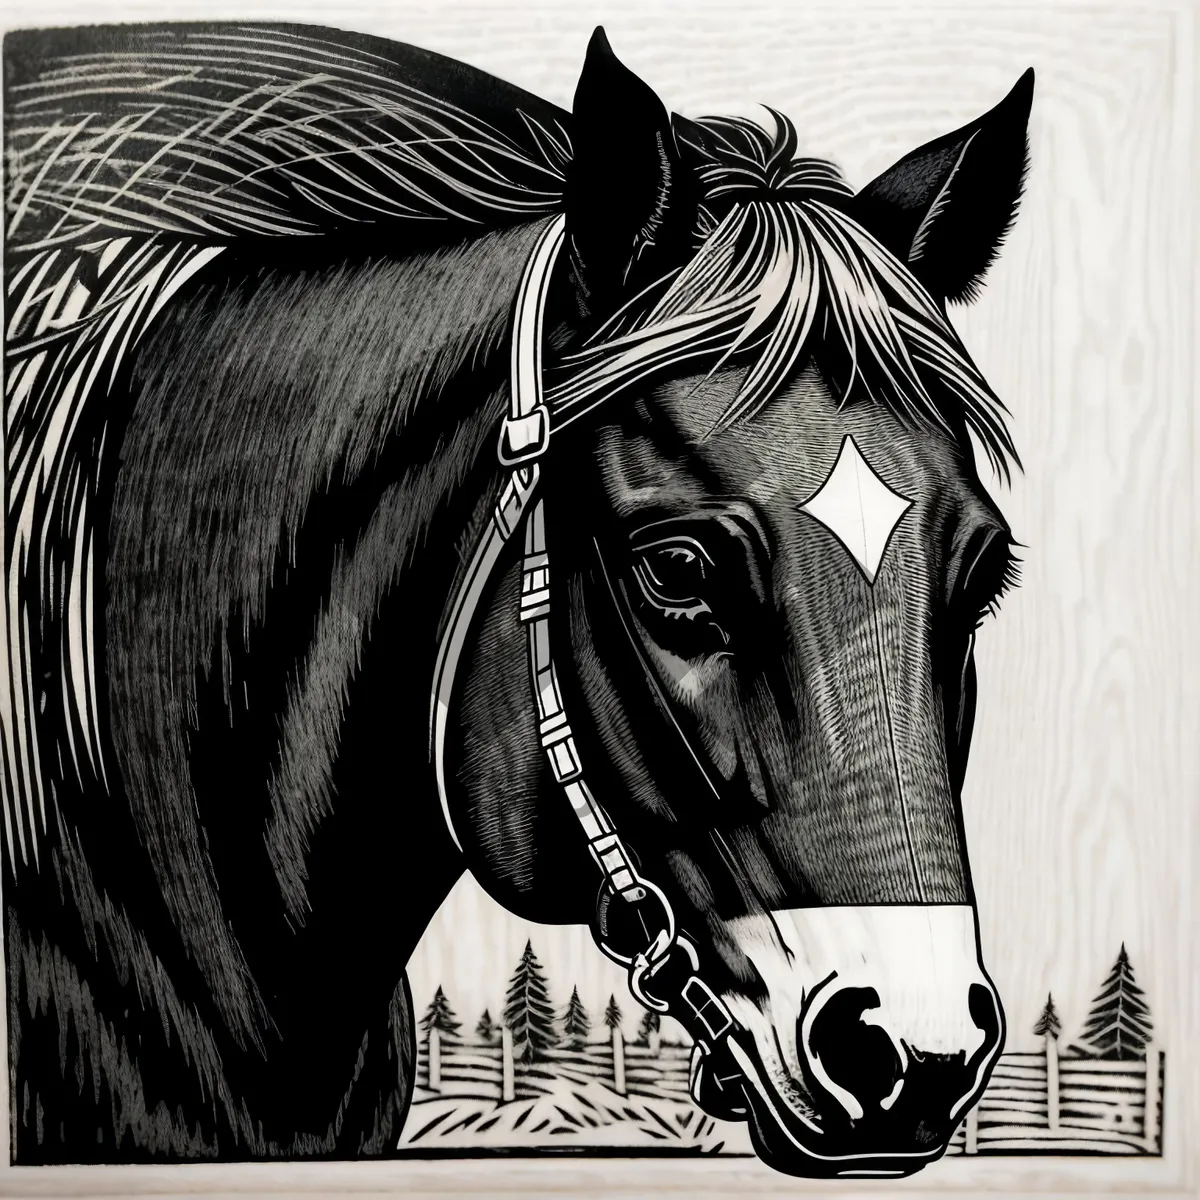 Picture of Striped Equine Beauty in the Wild.